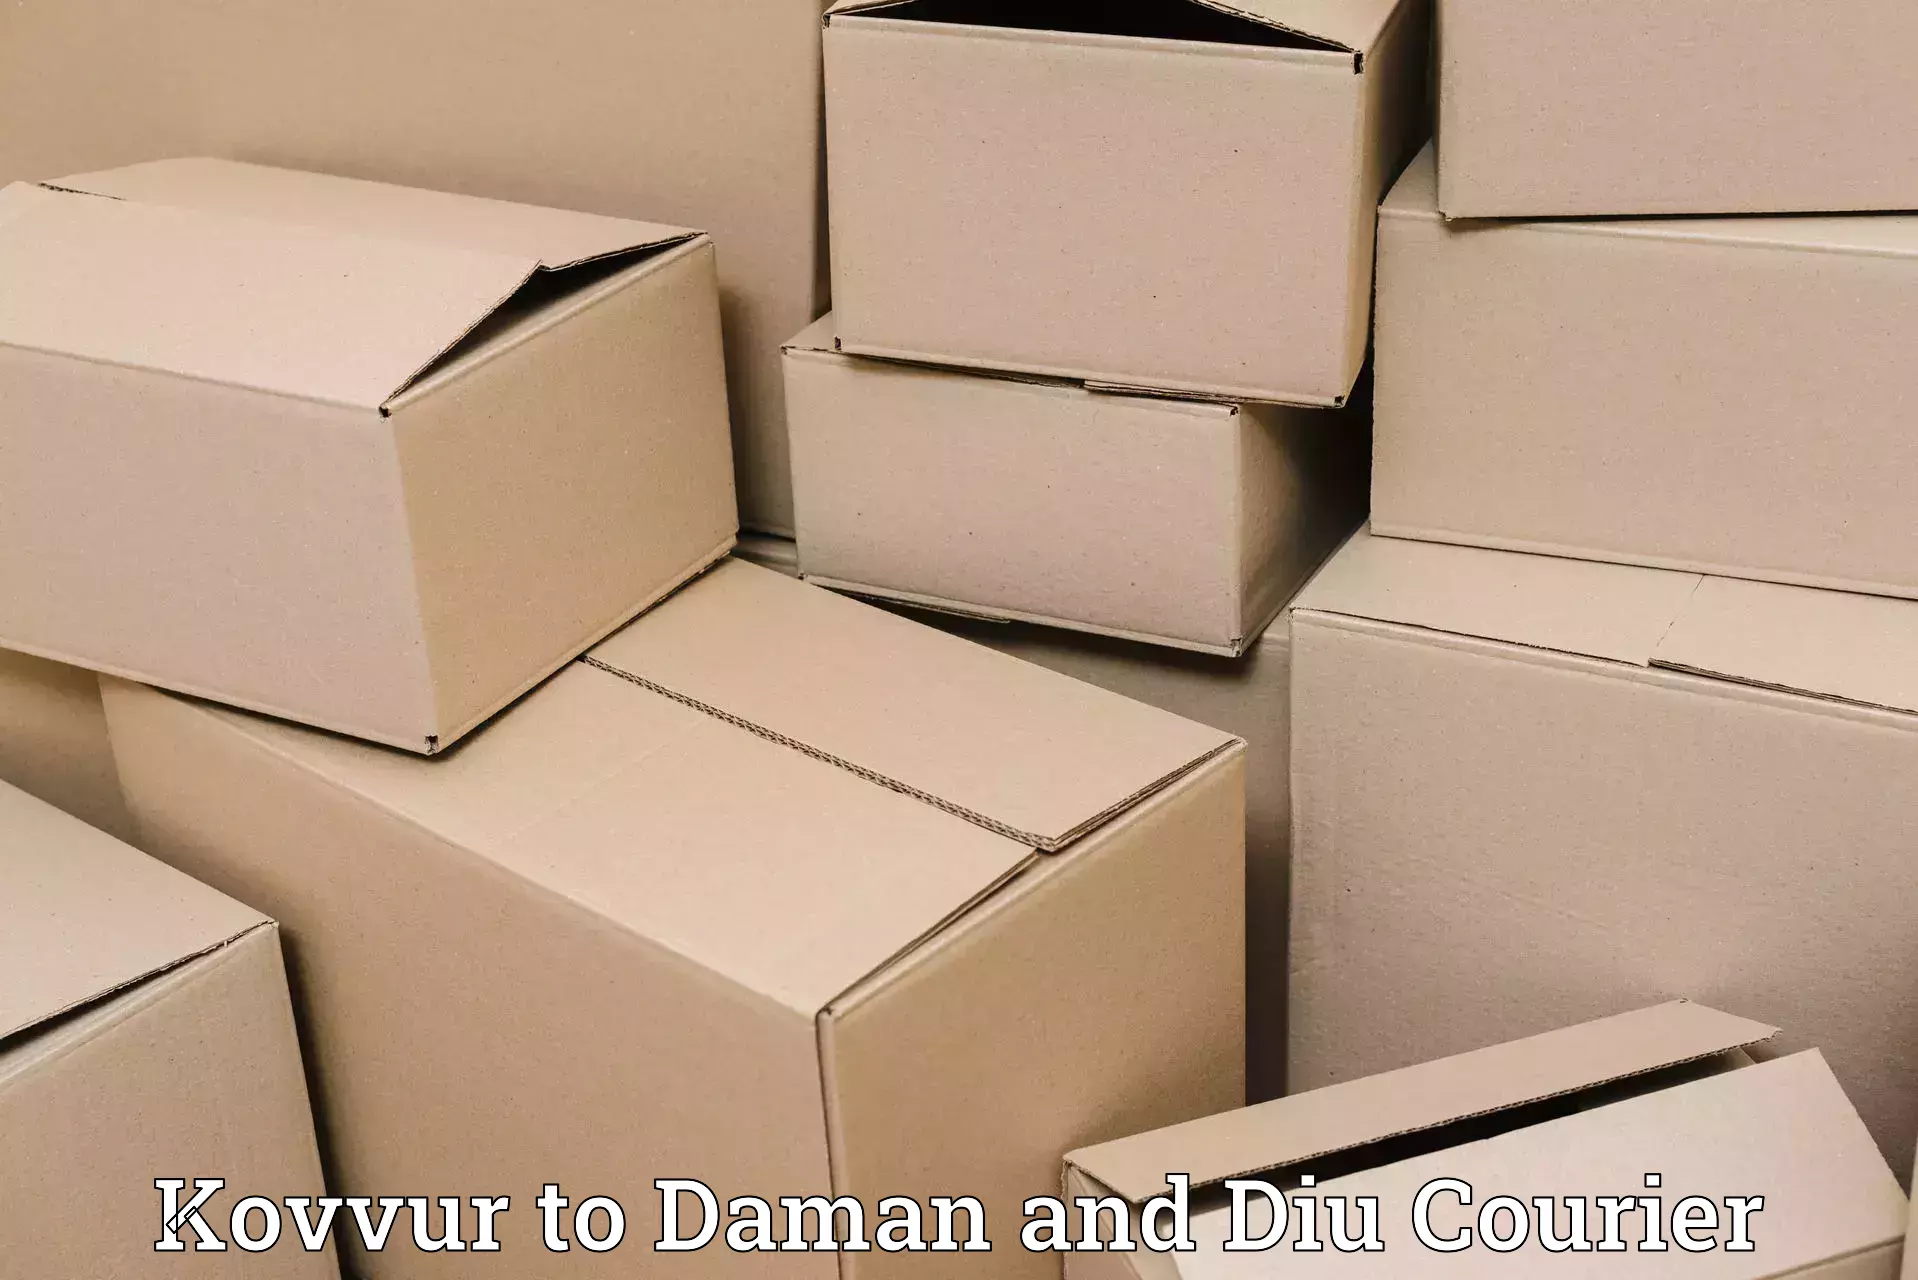 Sustainable shipping practices Kovvur to Daman and Diu